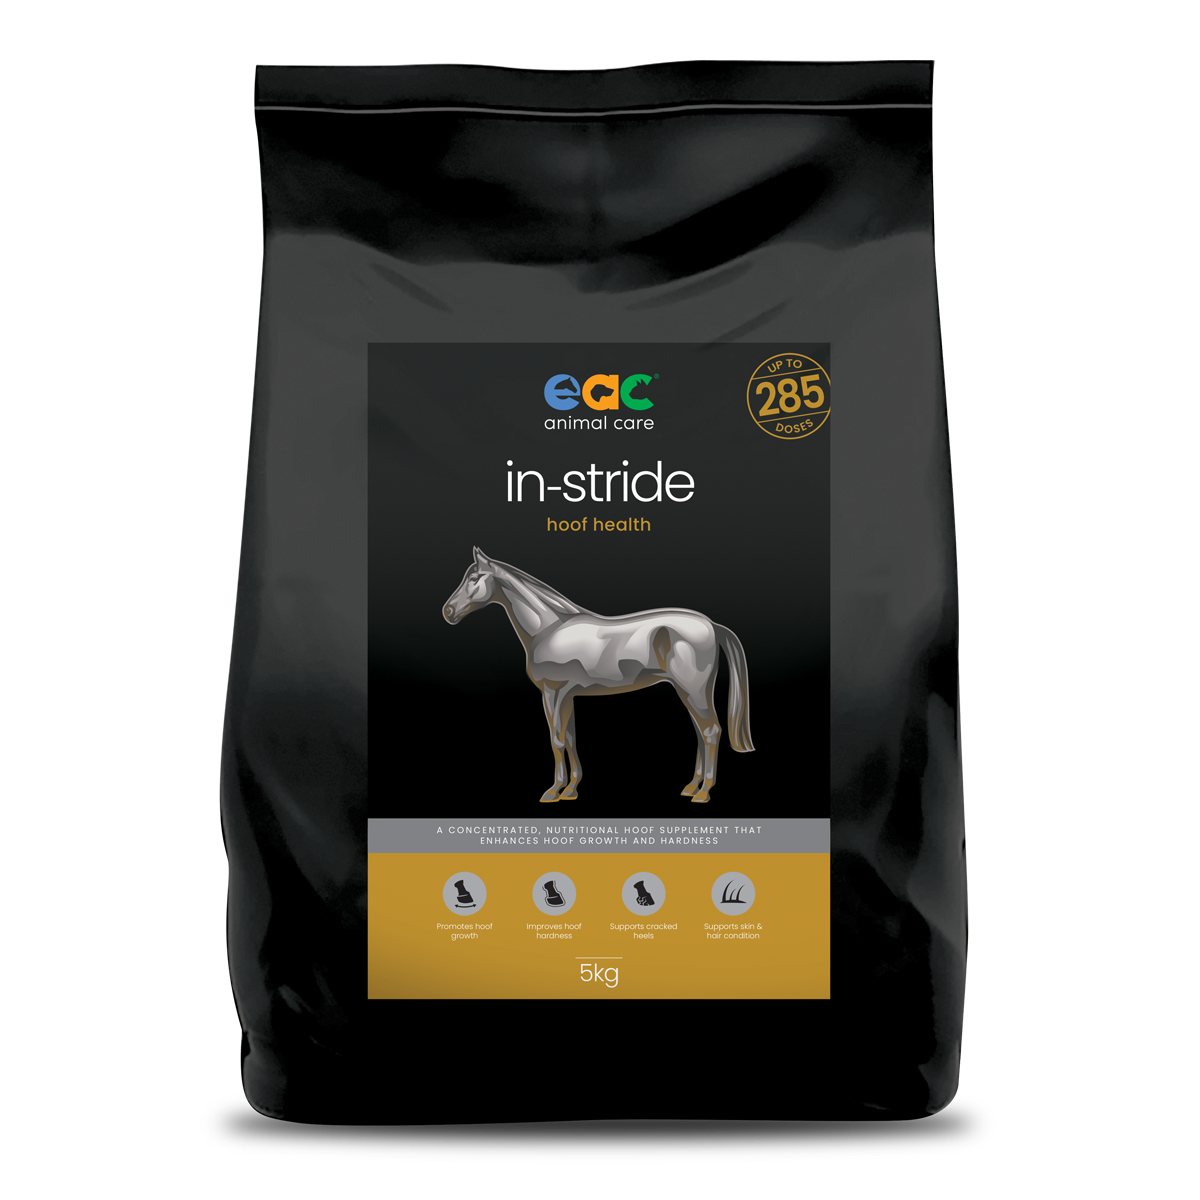 A black 5kg bag of 'in-stride hoof health' supplement for horses, with an image of a horse and bullet points highlighting benefits for hoof growth and hardness.